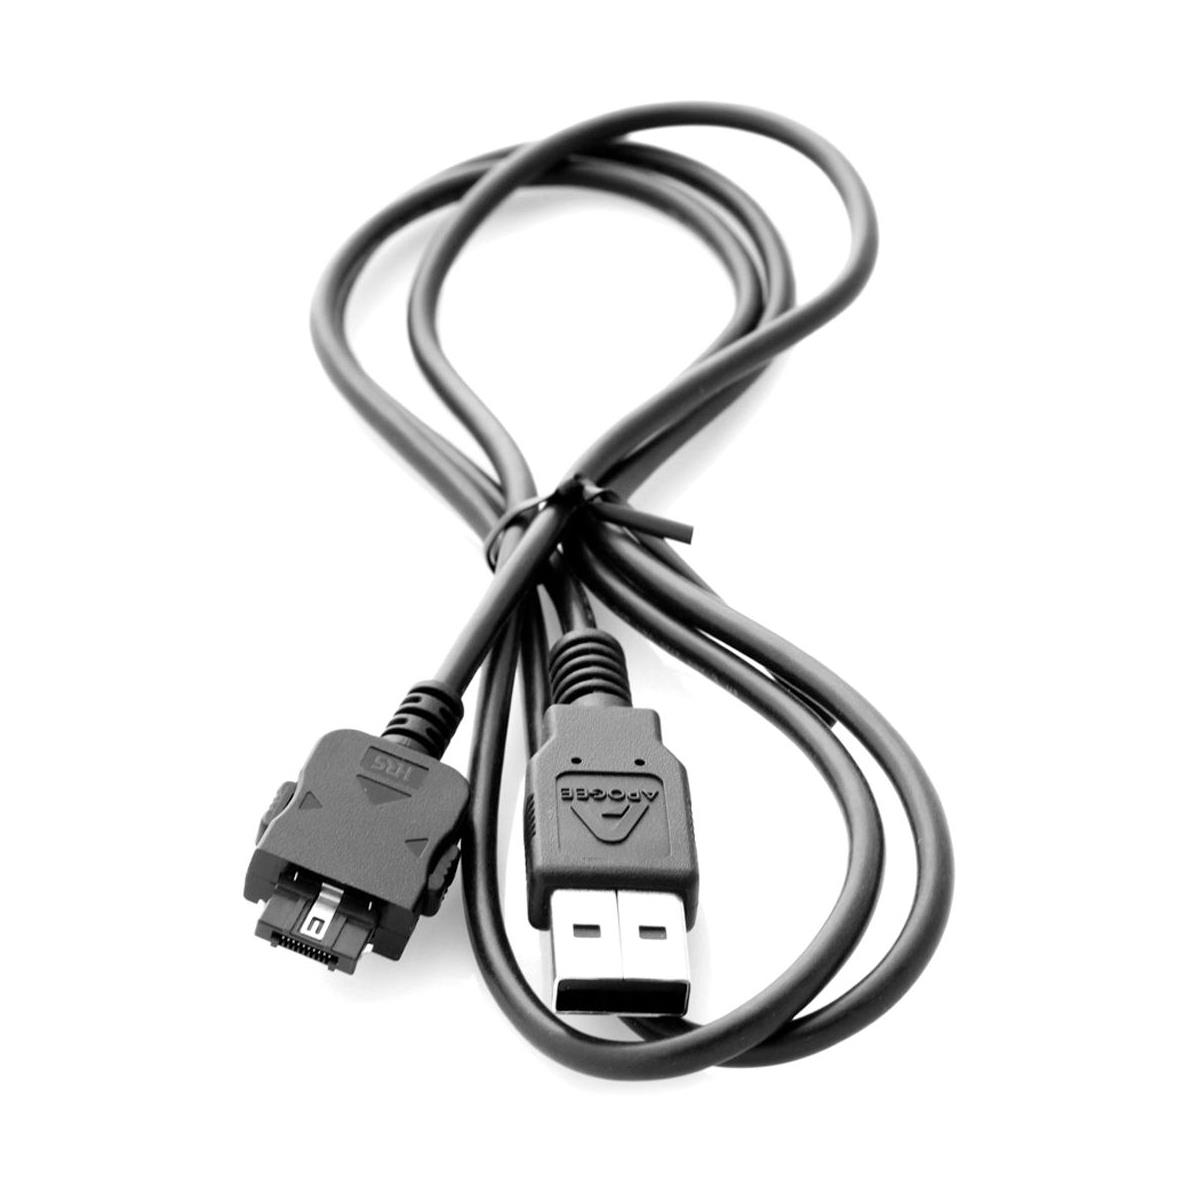 Image of Apogee Electronics 1m Hirose to USB-A Cable for JAM Interface and MiC Microphone